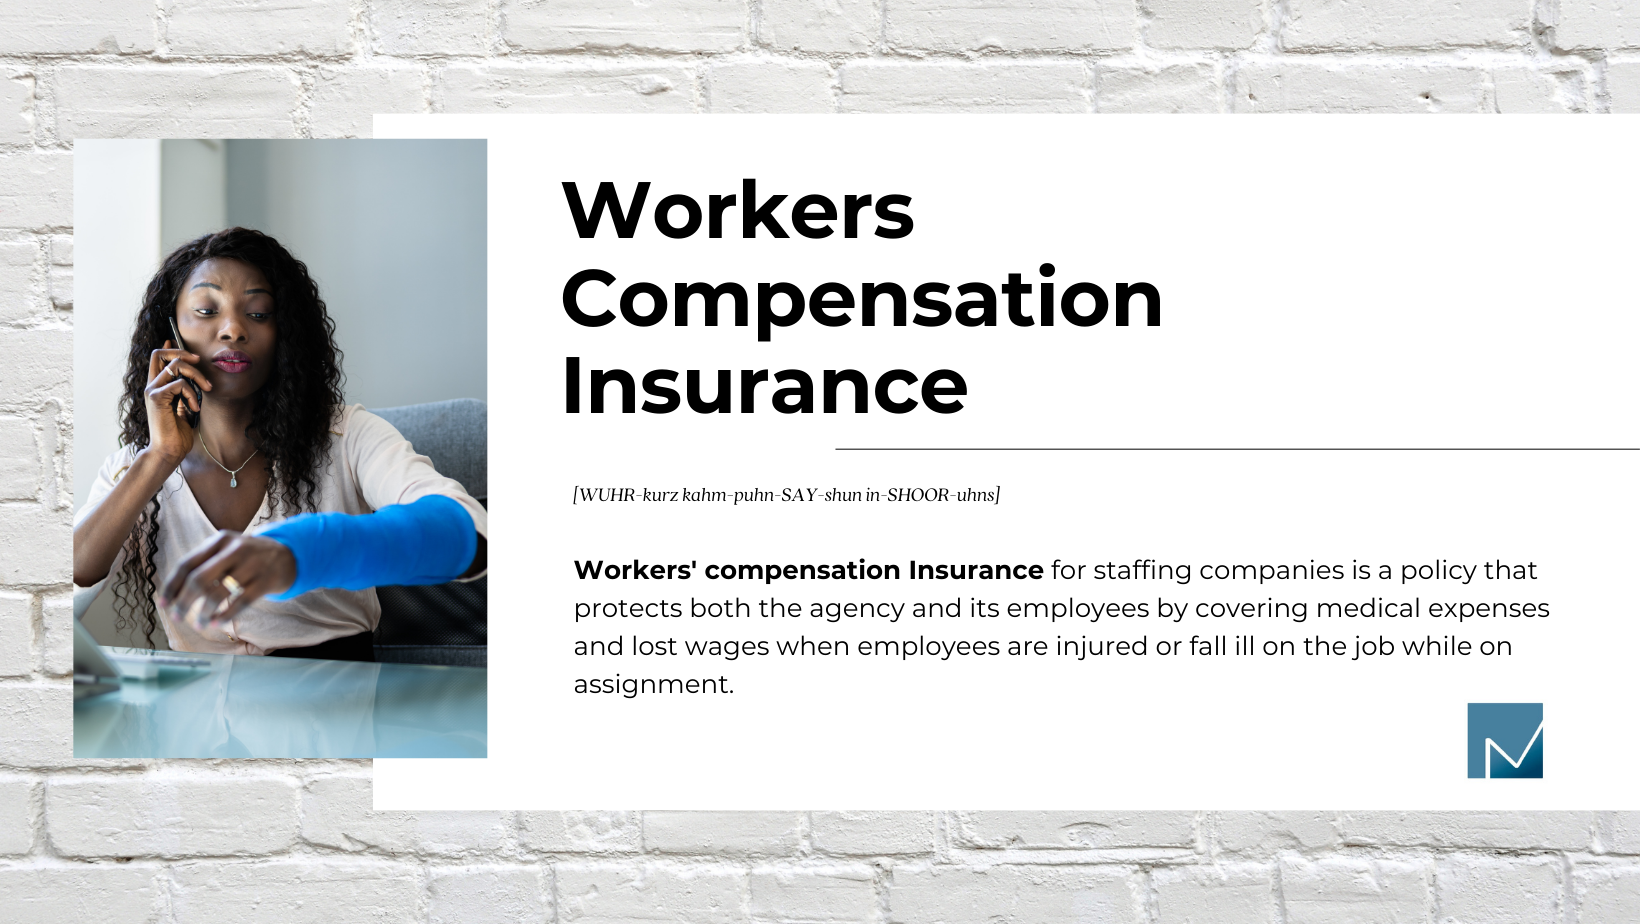 Workers' compensation Insurance for staffing companies is a policy that protects both the agency and its employees by covering medical expenses and lost wages when employees are injured or fall ill on the job while on assignment.